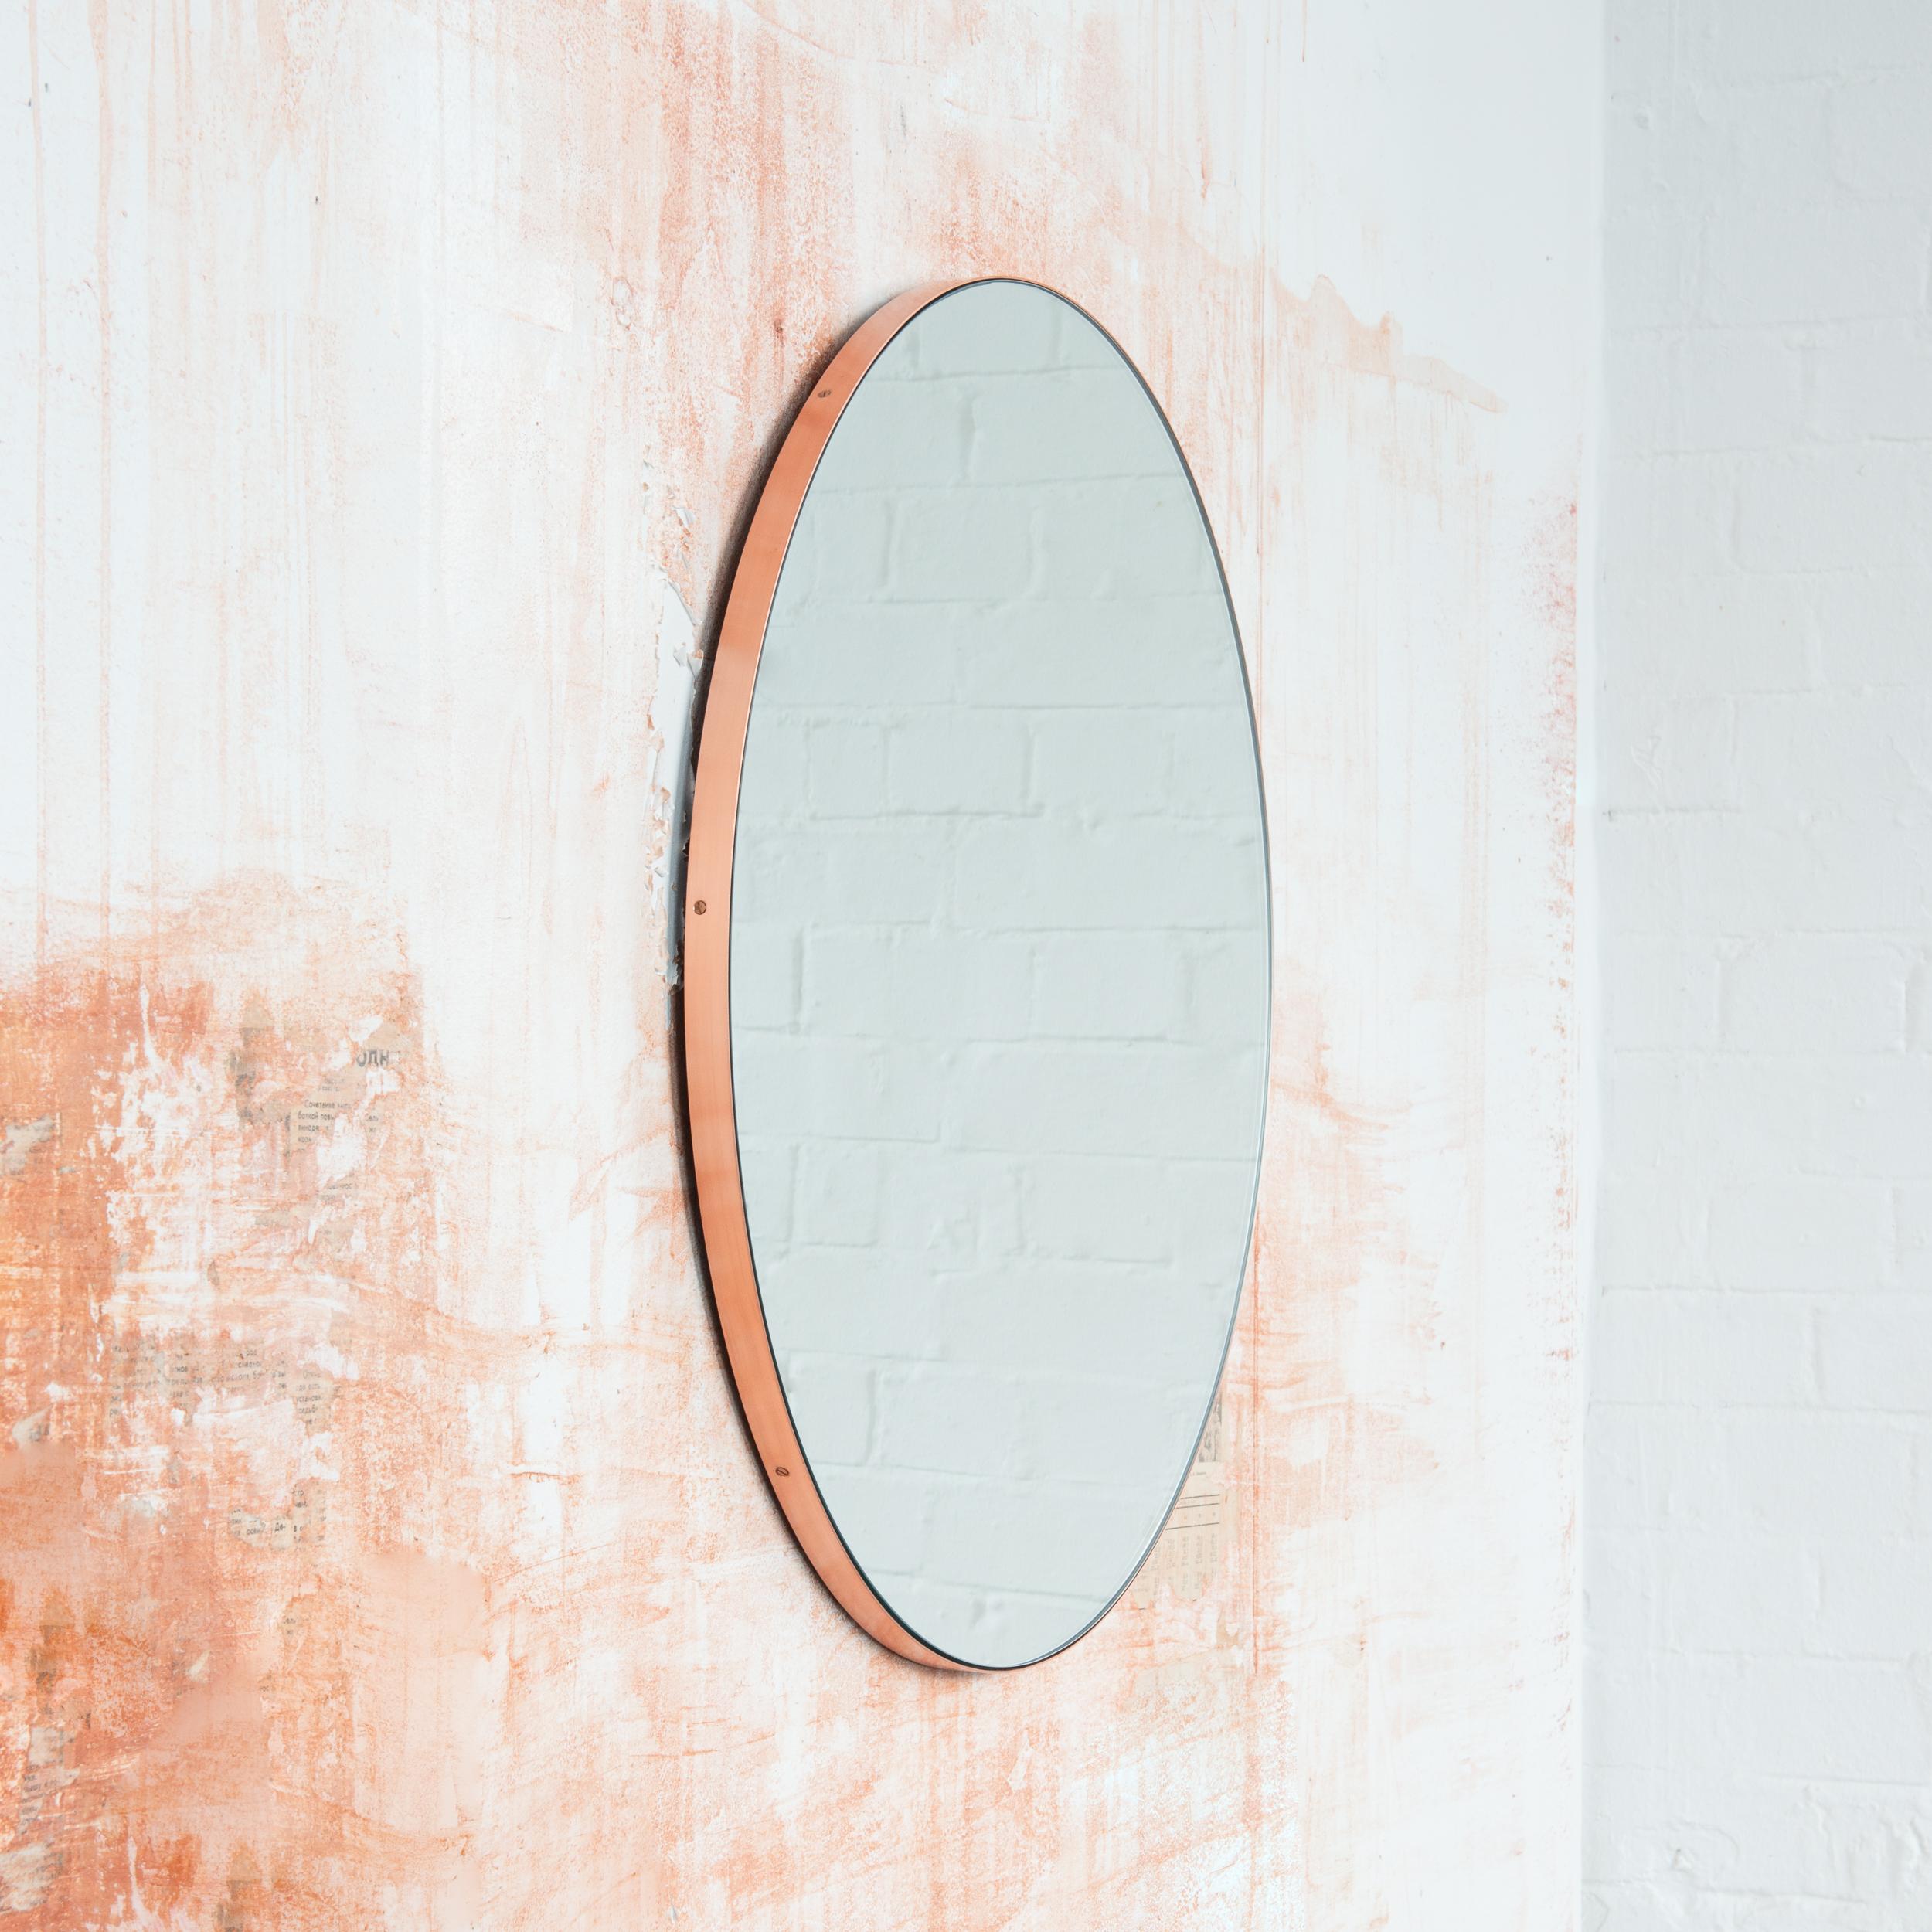 Minimalist round mirror with an elegant slim brushed copper frame. The detailing and finish, including visible copper plated screws, emphasise the crafty and quality feel of the mirror, a true signature of our brand. Designed and handcrafted in